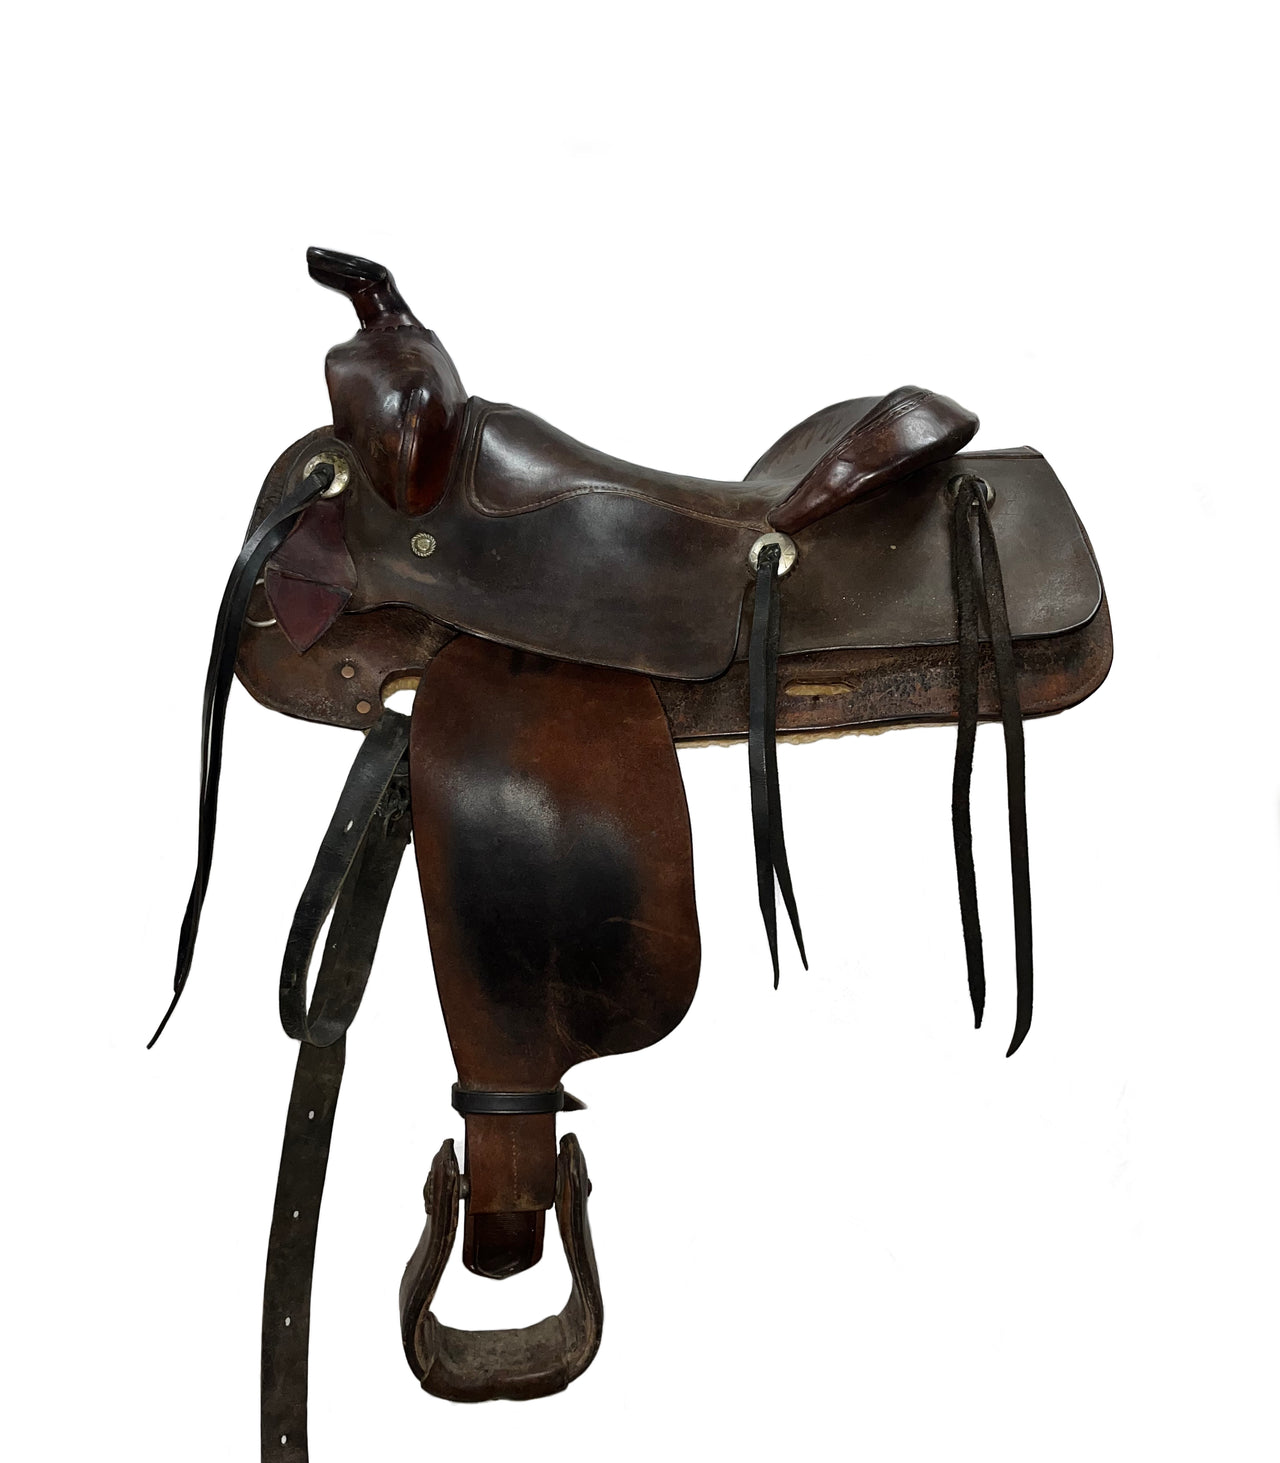 Western Saddle FQHB 16 Inch Second Hand - The Trading Stables